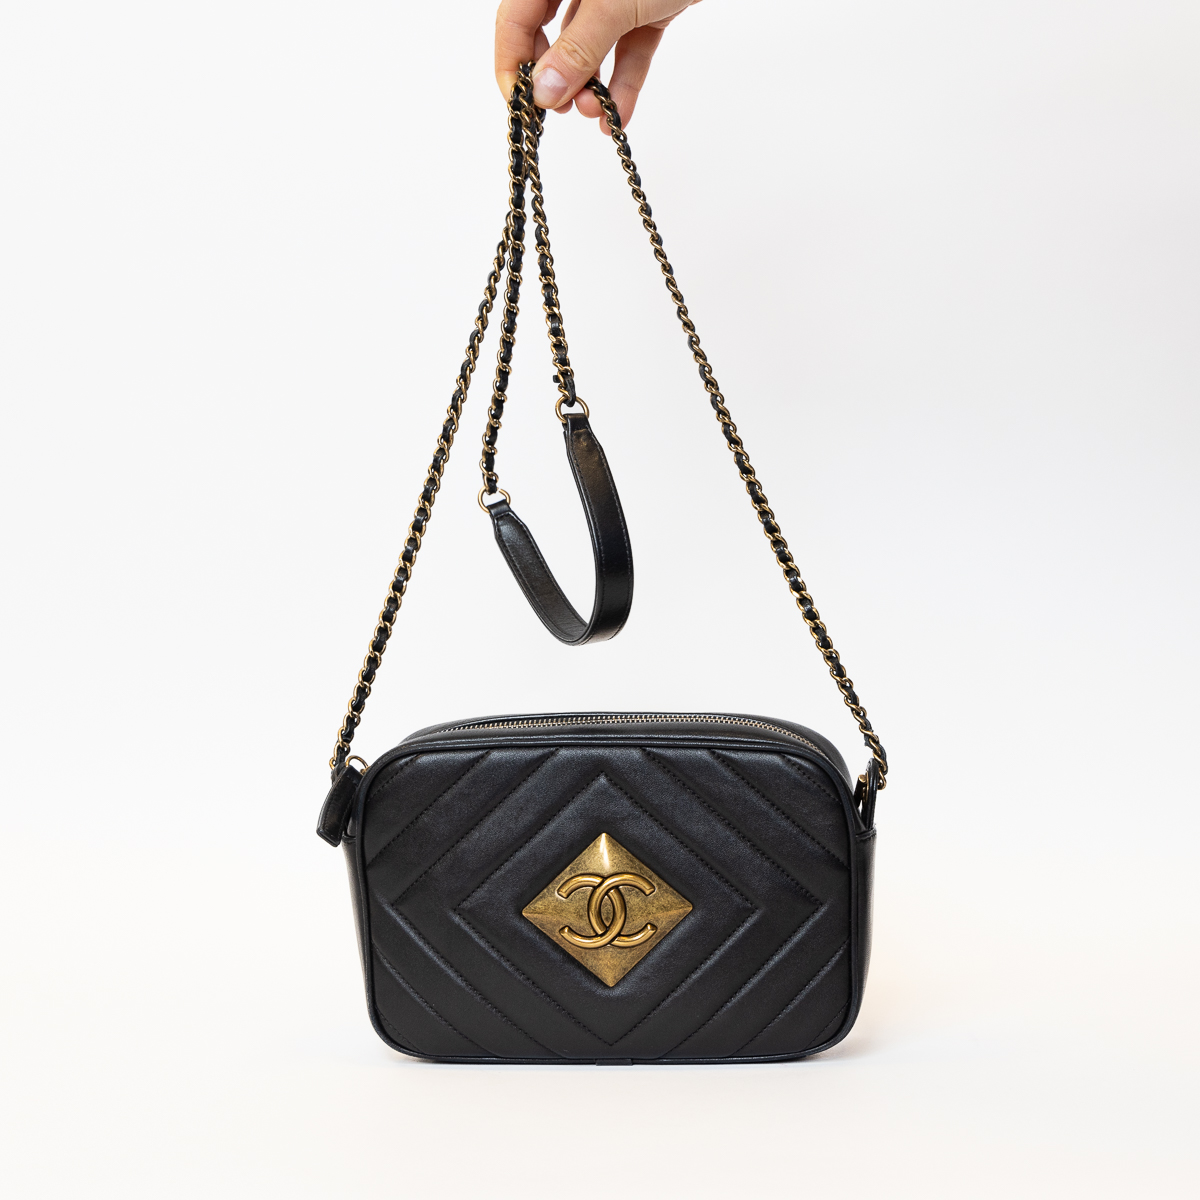 Chanel Camera Bag Black Lambskin with gold hardware